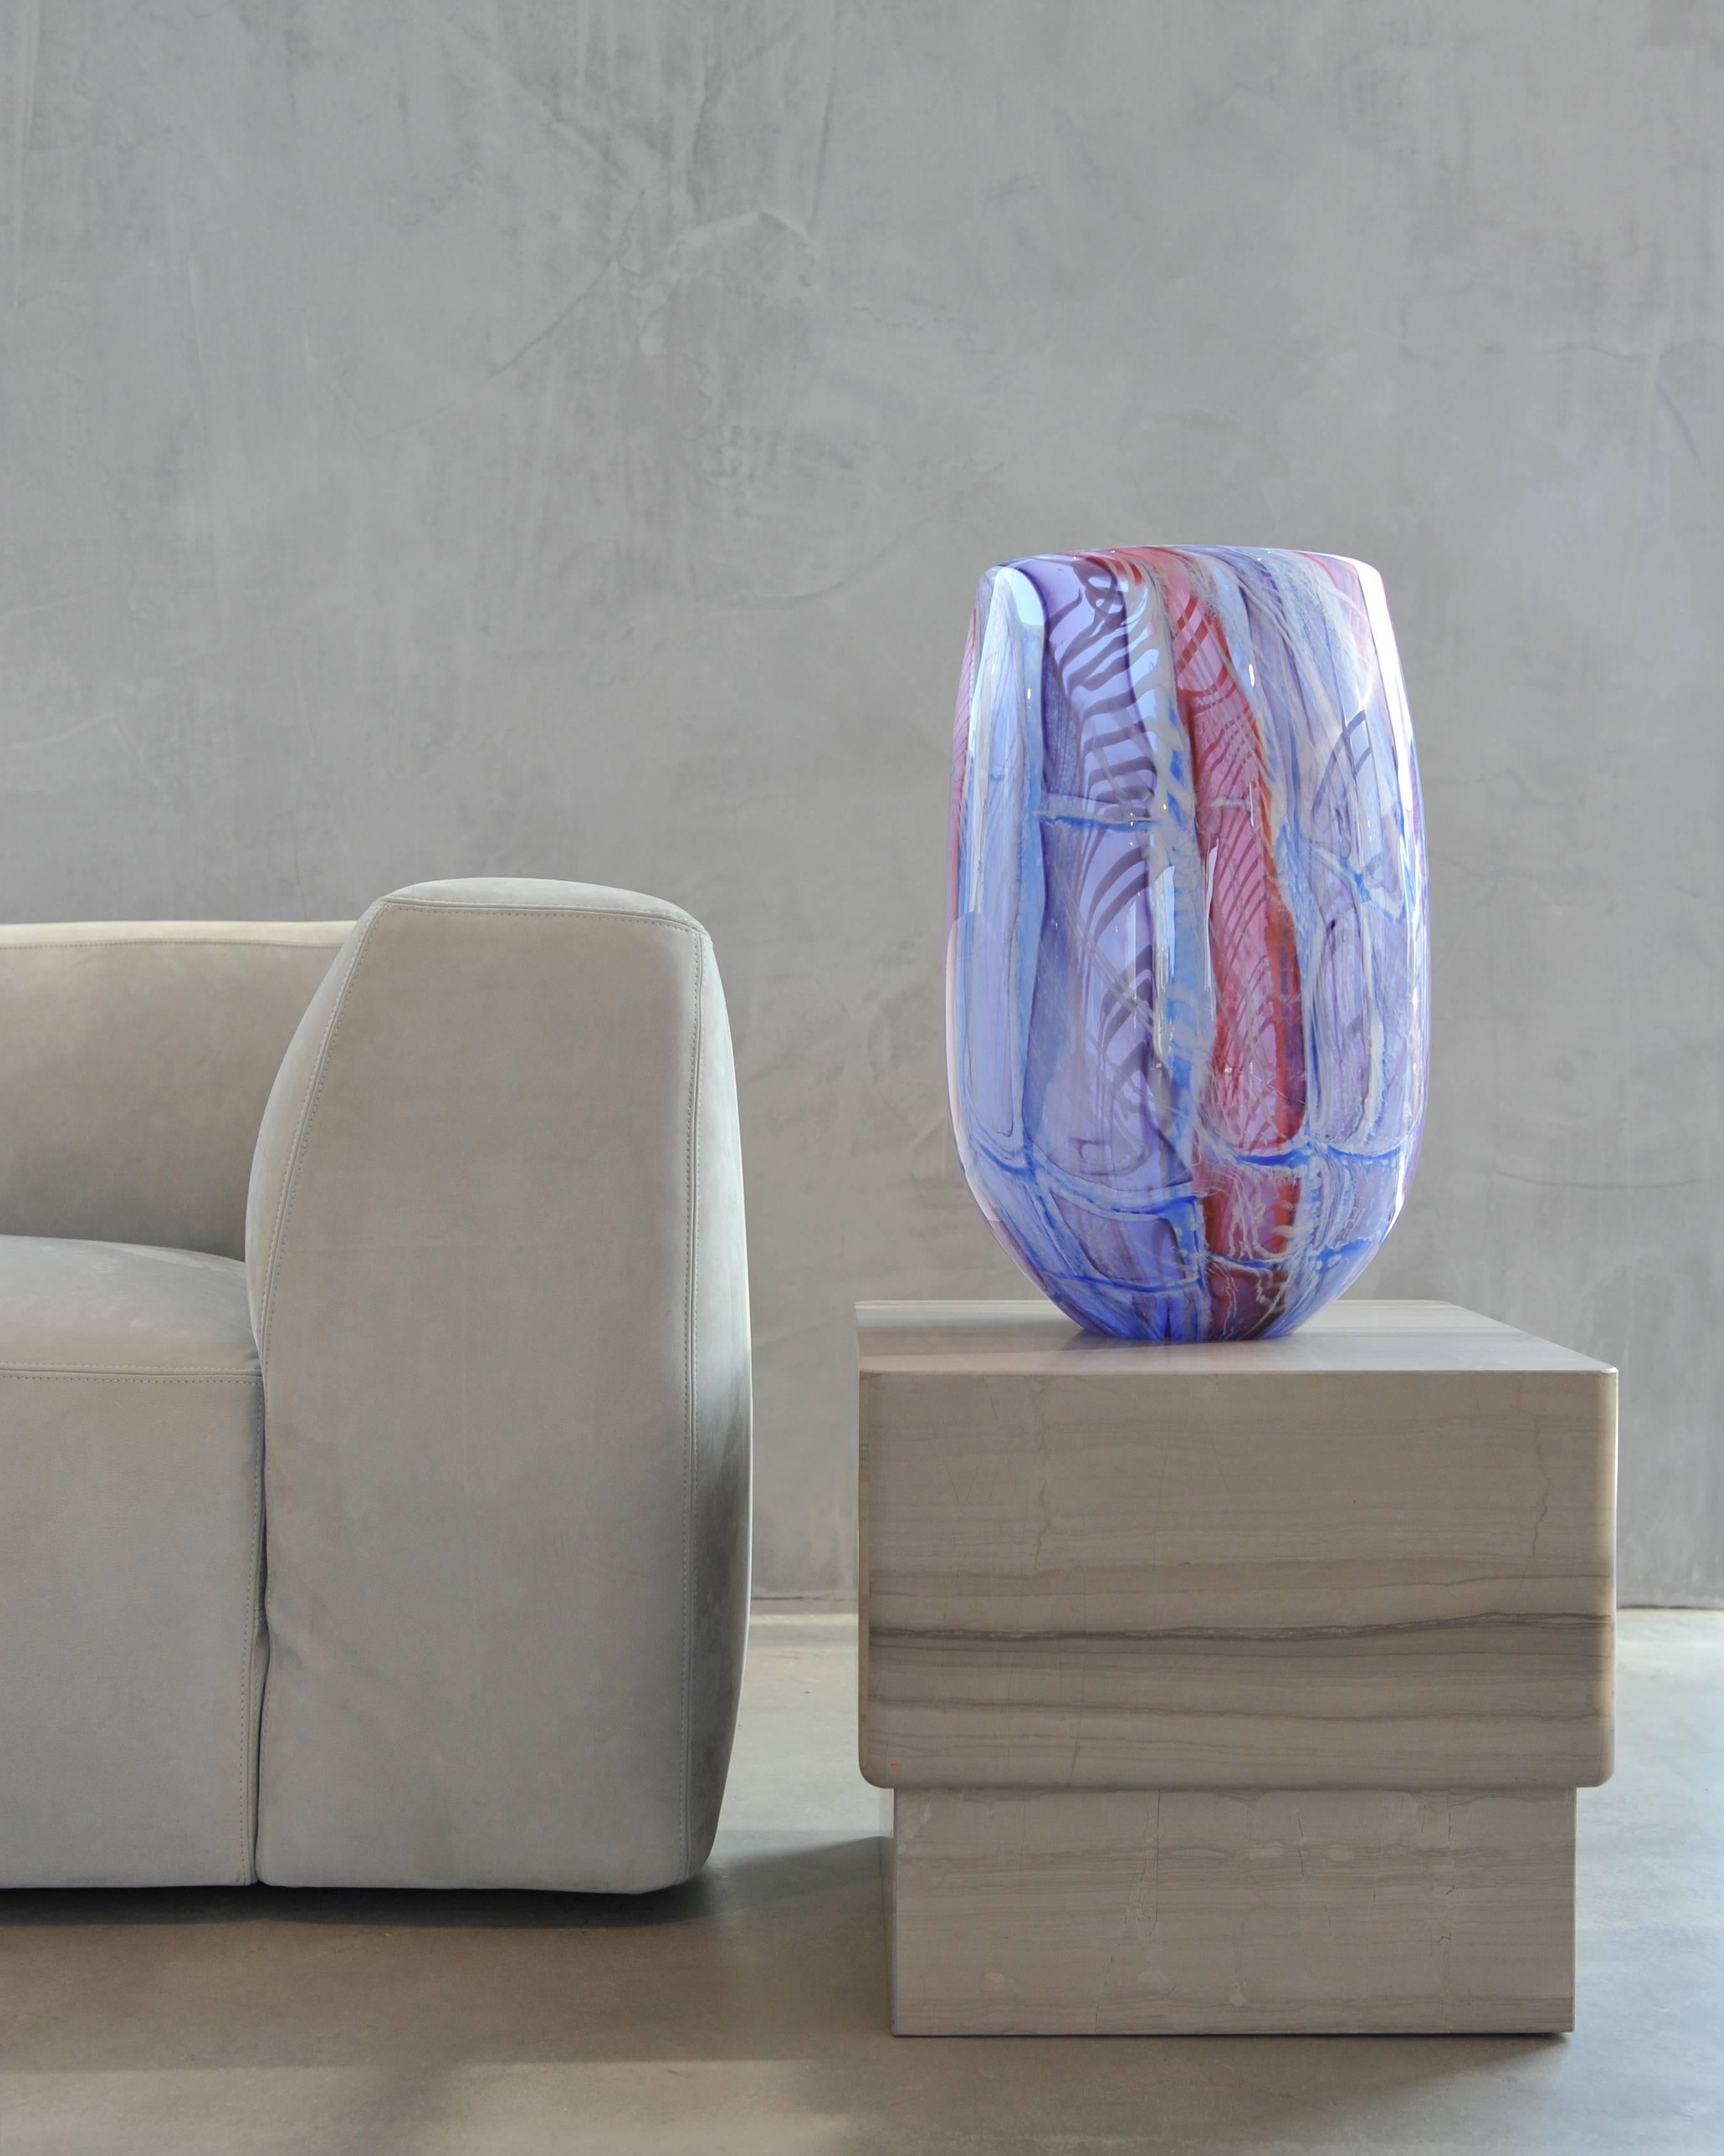 Hand-Crafted Large Blown Glass Design Vase in Blue and Red. Colorful Murano Style Glass For Sale